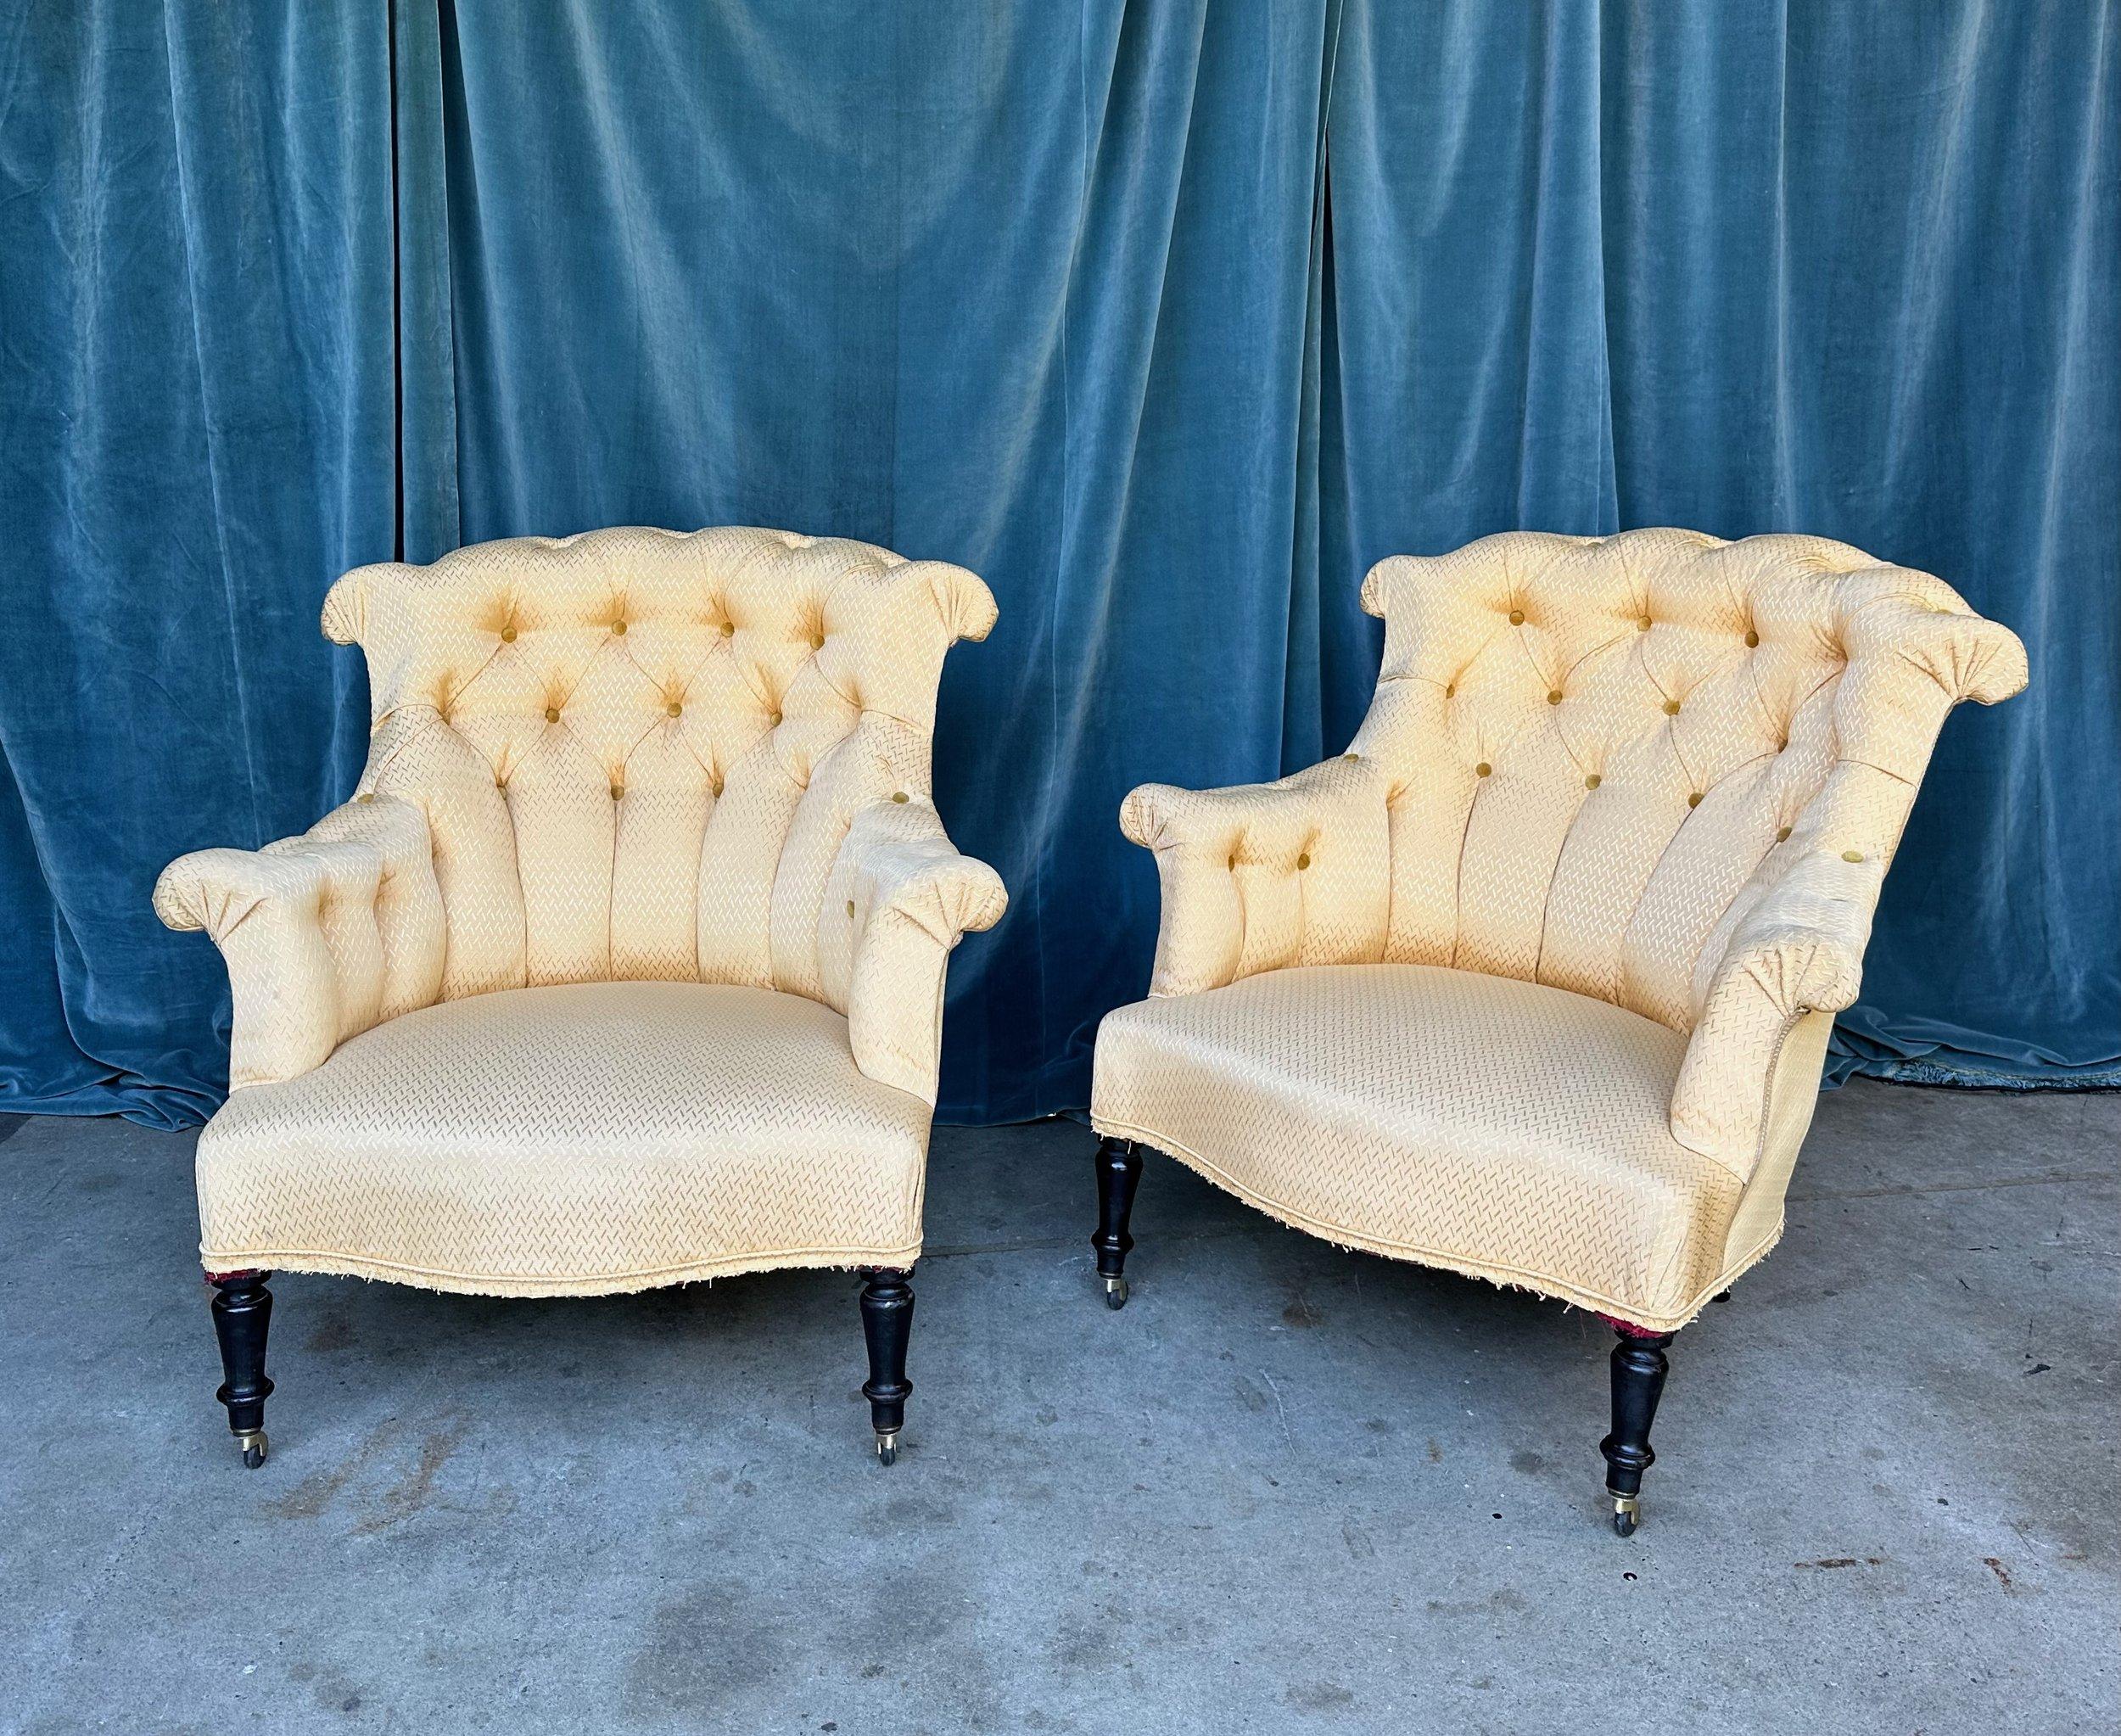 An exquisite pair of French Napoleon III period armchairs from the late 19th century. With their tufted backs and built in lumbar support, these chairs are remarkably comfortable and perfectly proportioned. While the upholstery is not new, the